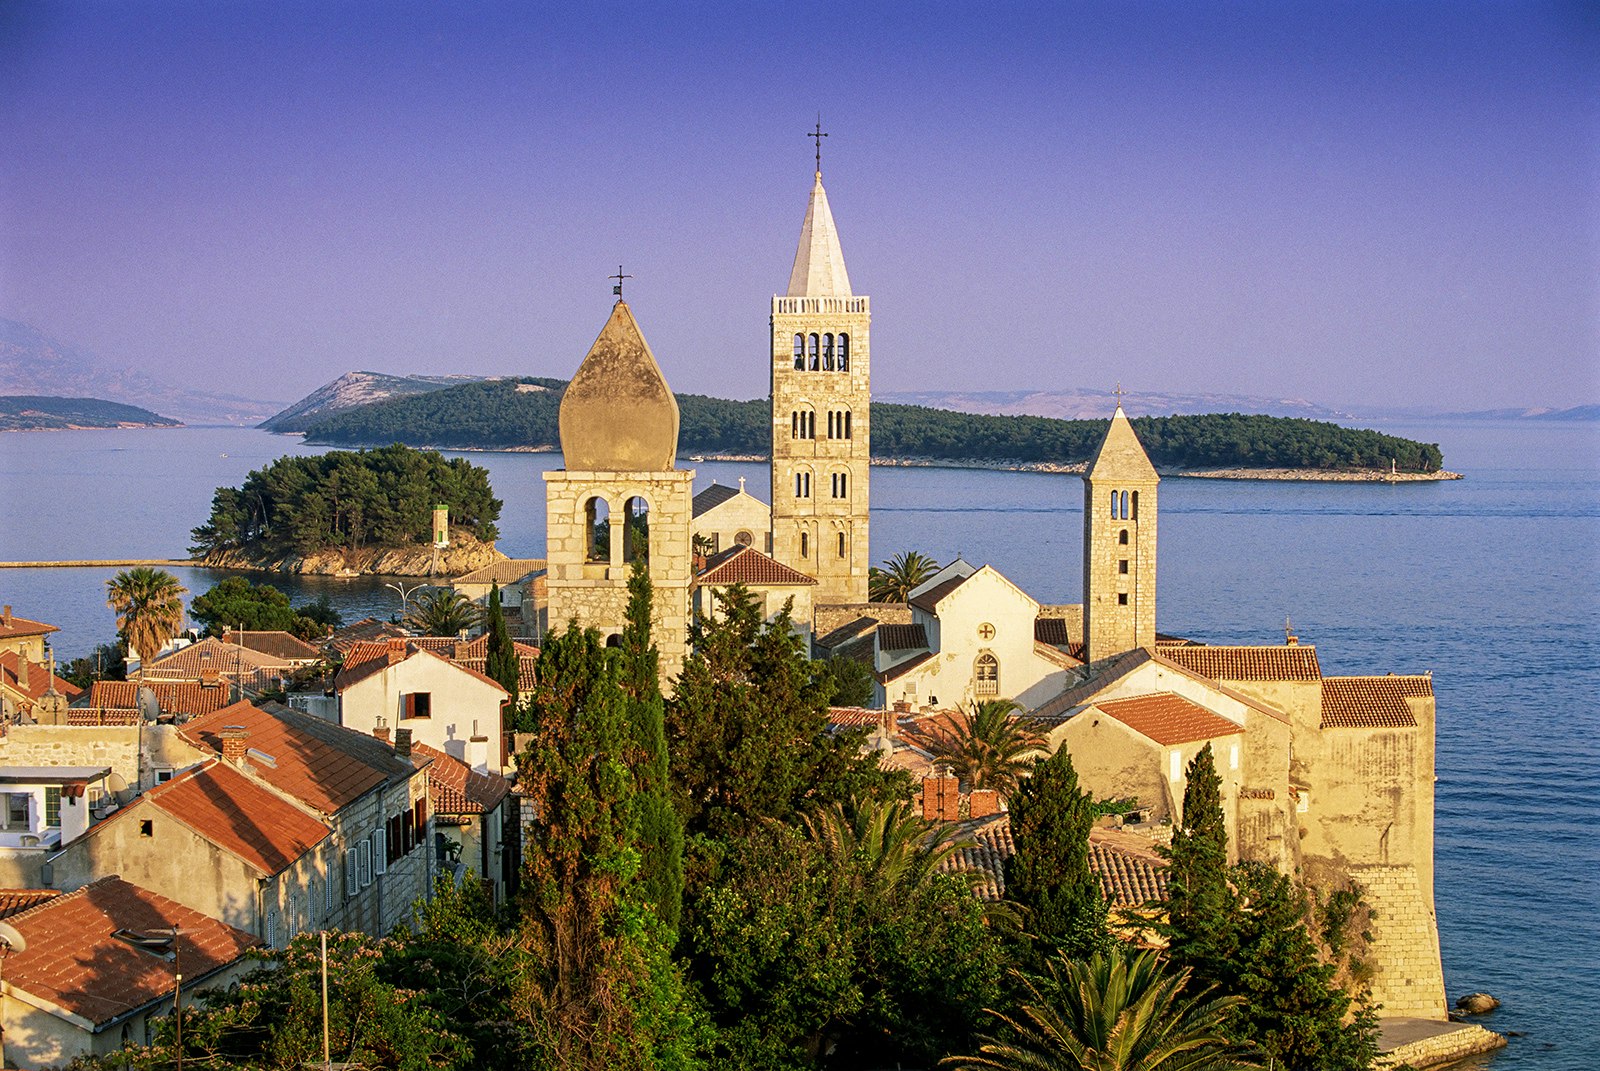 The historic spires of Rab at sunset, backed by the Kvarner Gulf.